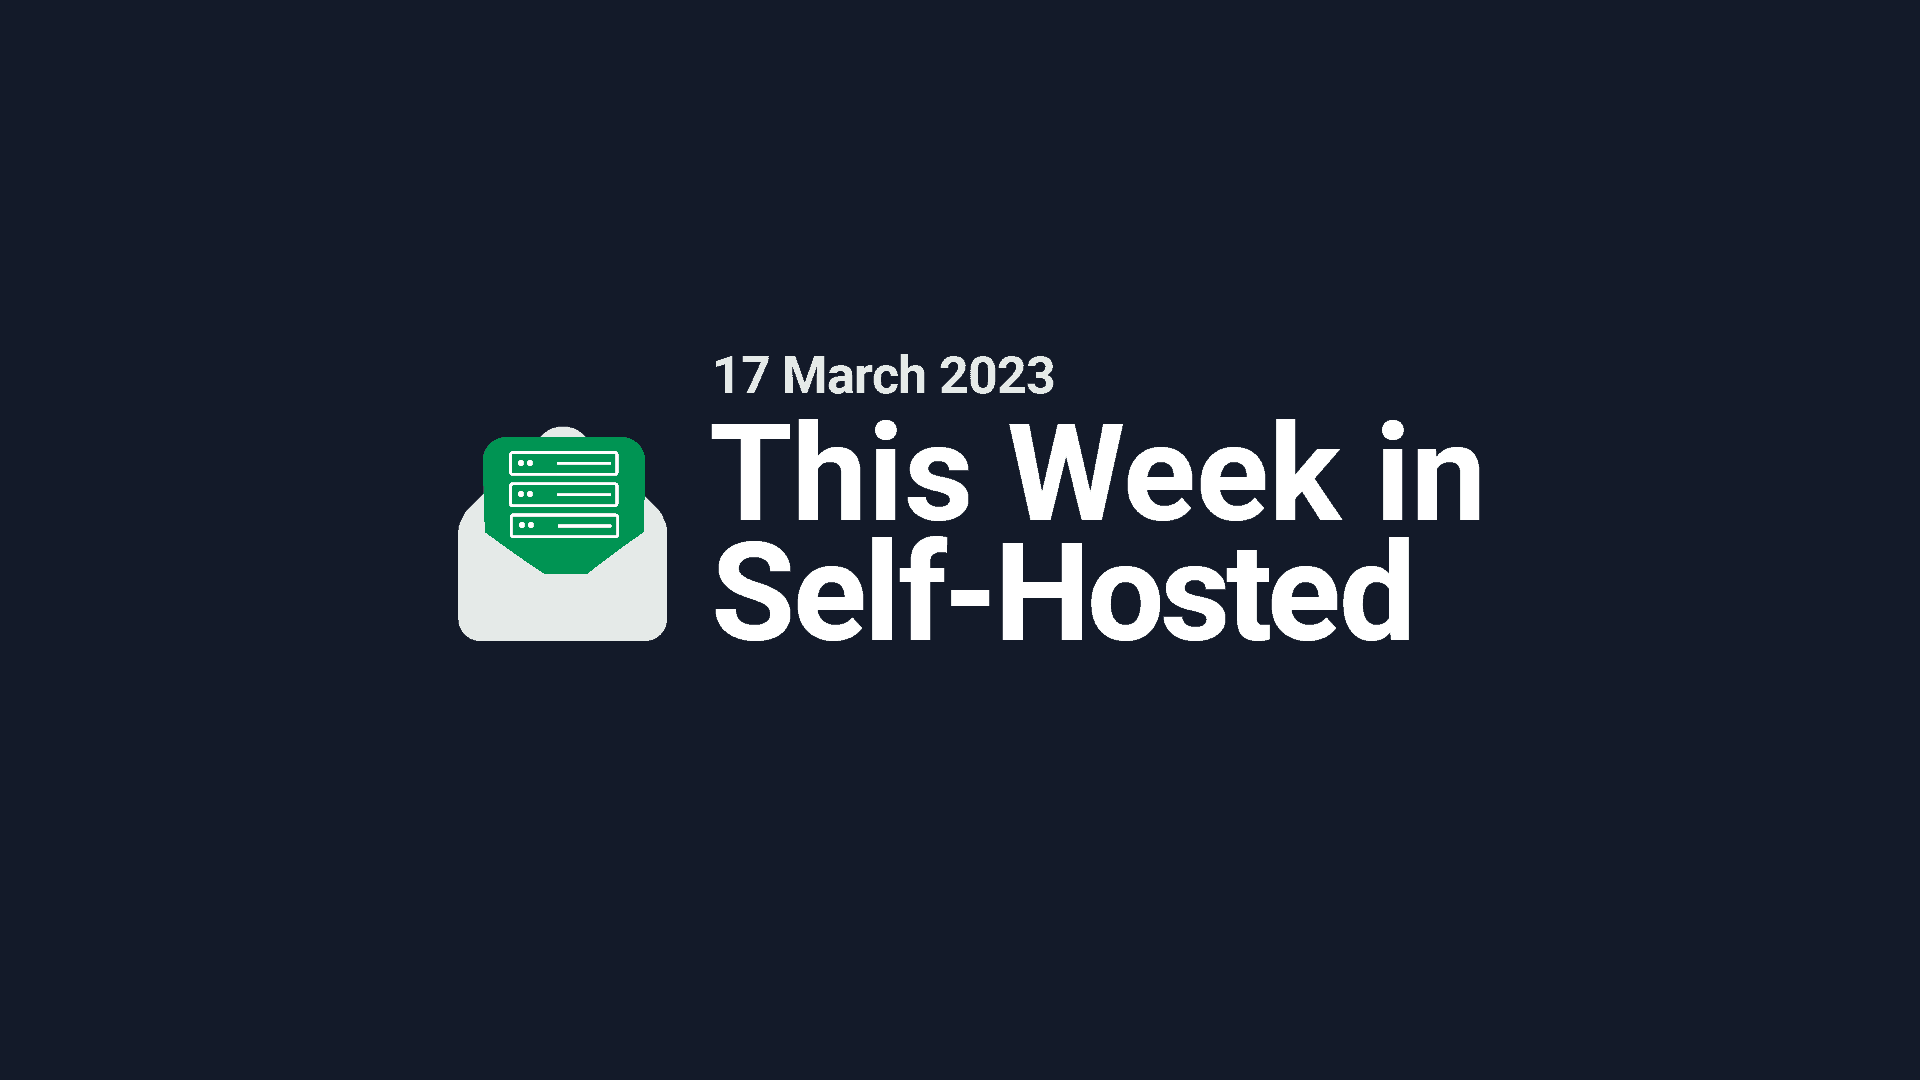 This Week in Self-Hosted (17 March 2023) Post image